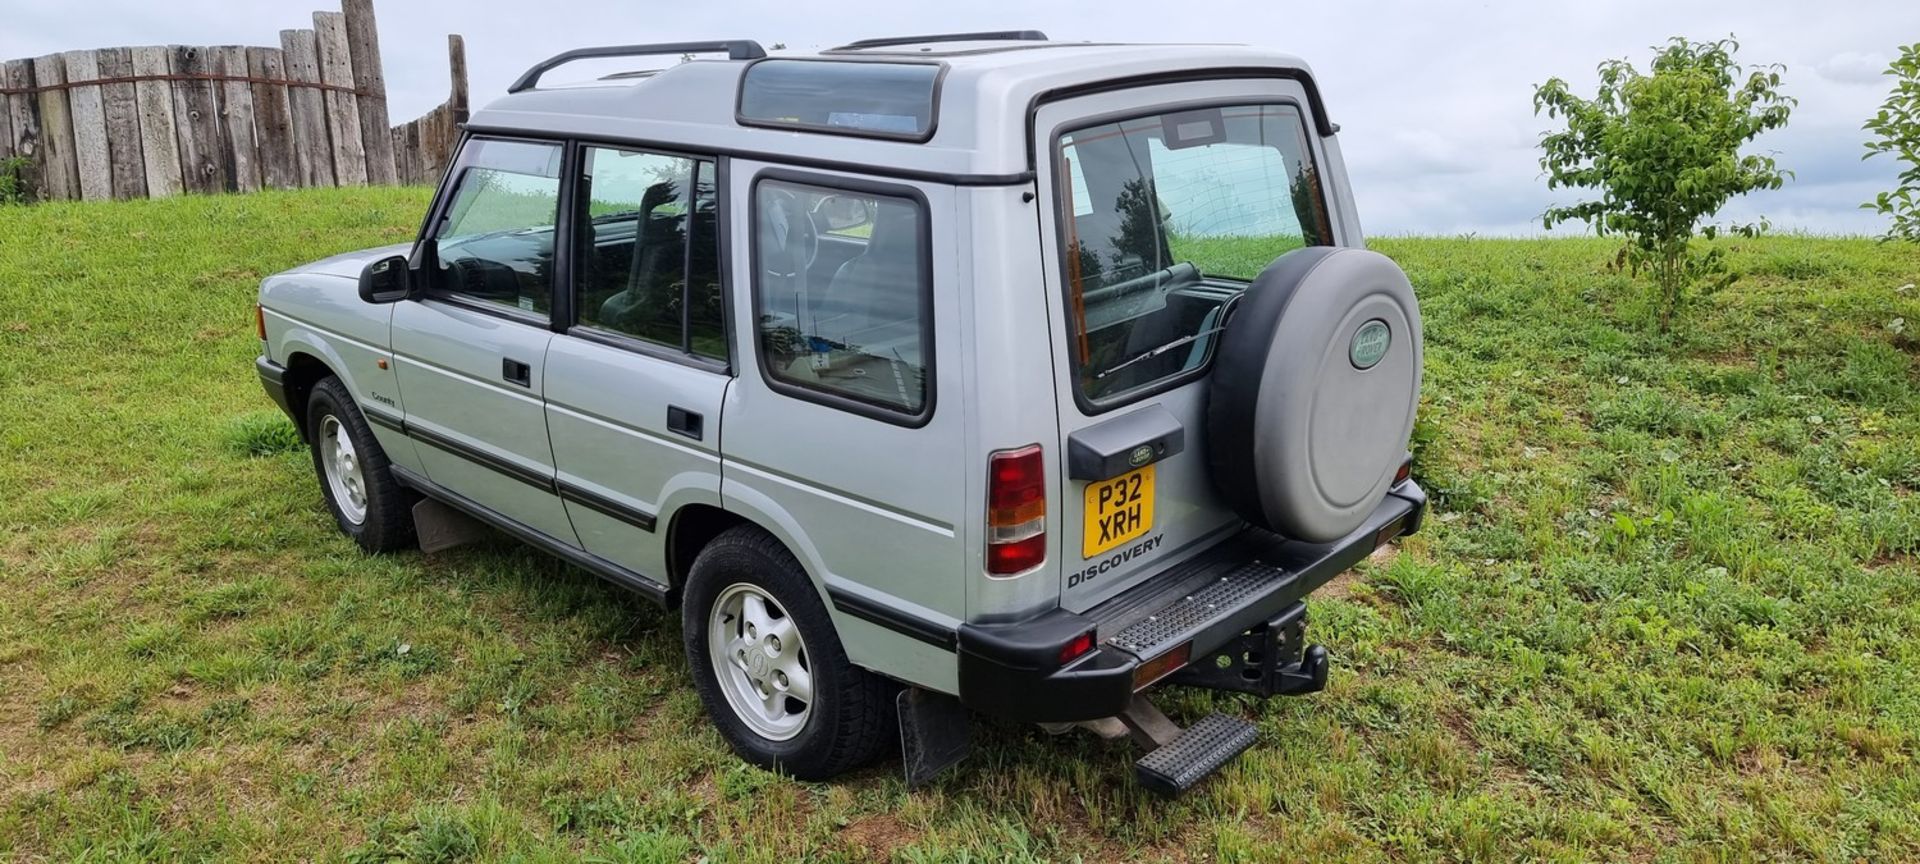 1996 Land Rover Discovery Series 1, 300 TDi, 2495cc automatic. Registration number P32 XRH. - Image 4 of 23